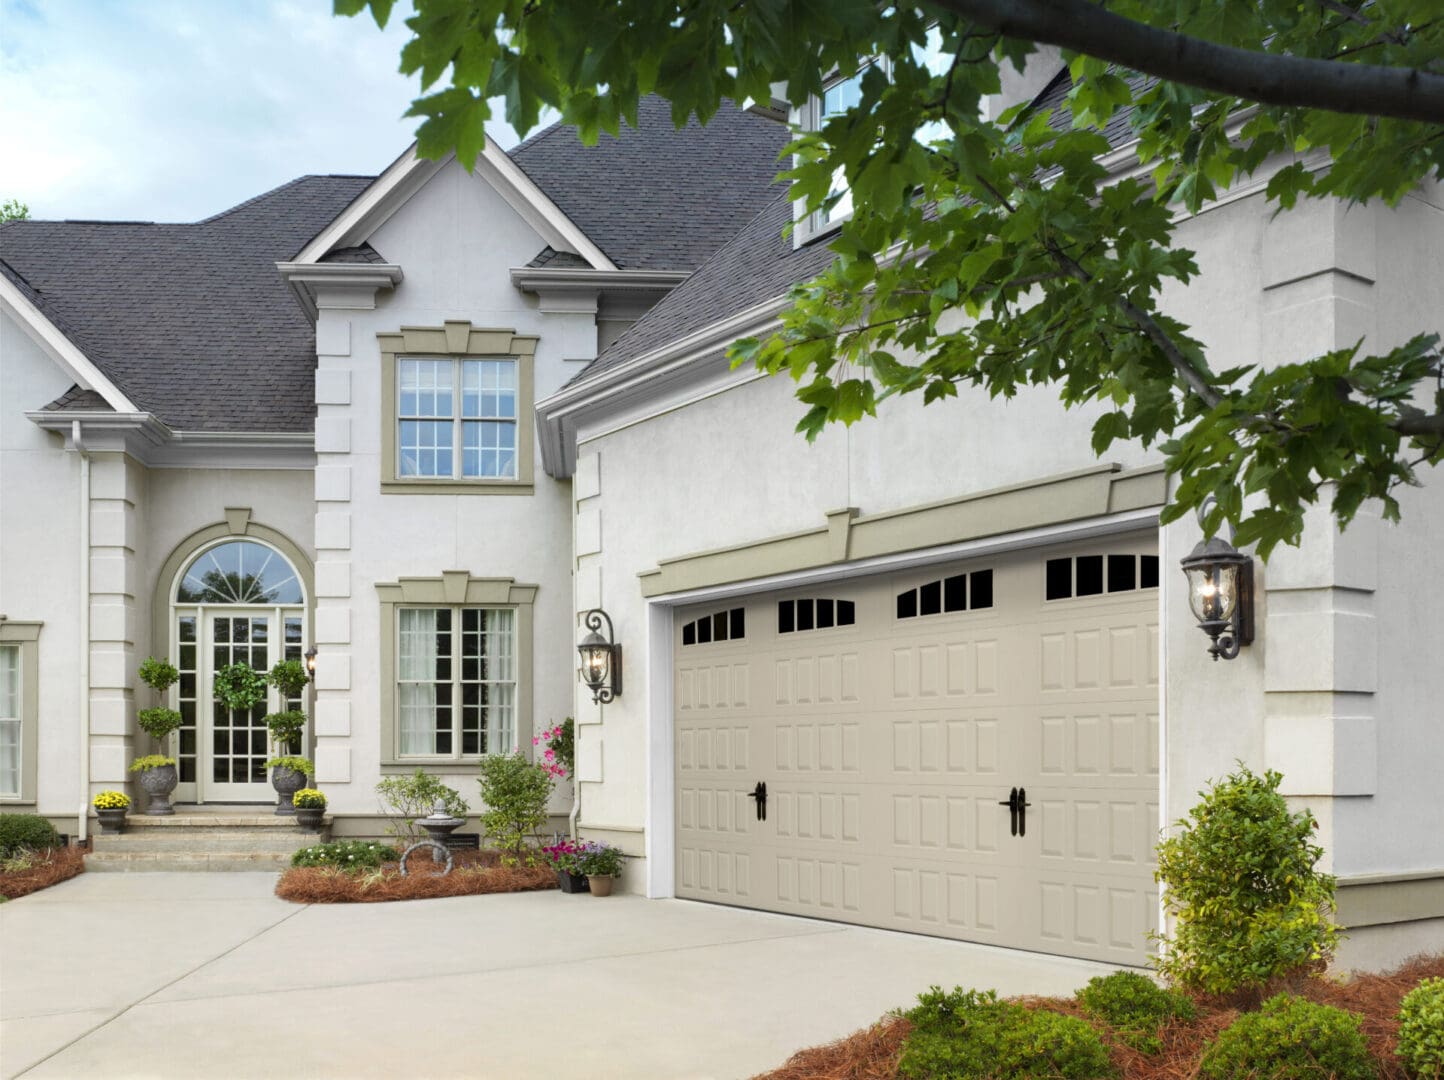 Modern white two-story house with a prominently featured, closed beige garage door, complemented by a well-maintained driveway and green landscaping.